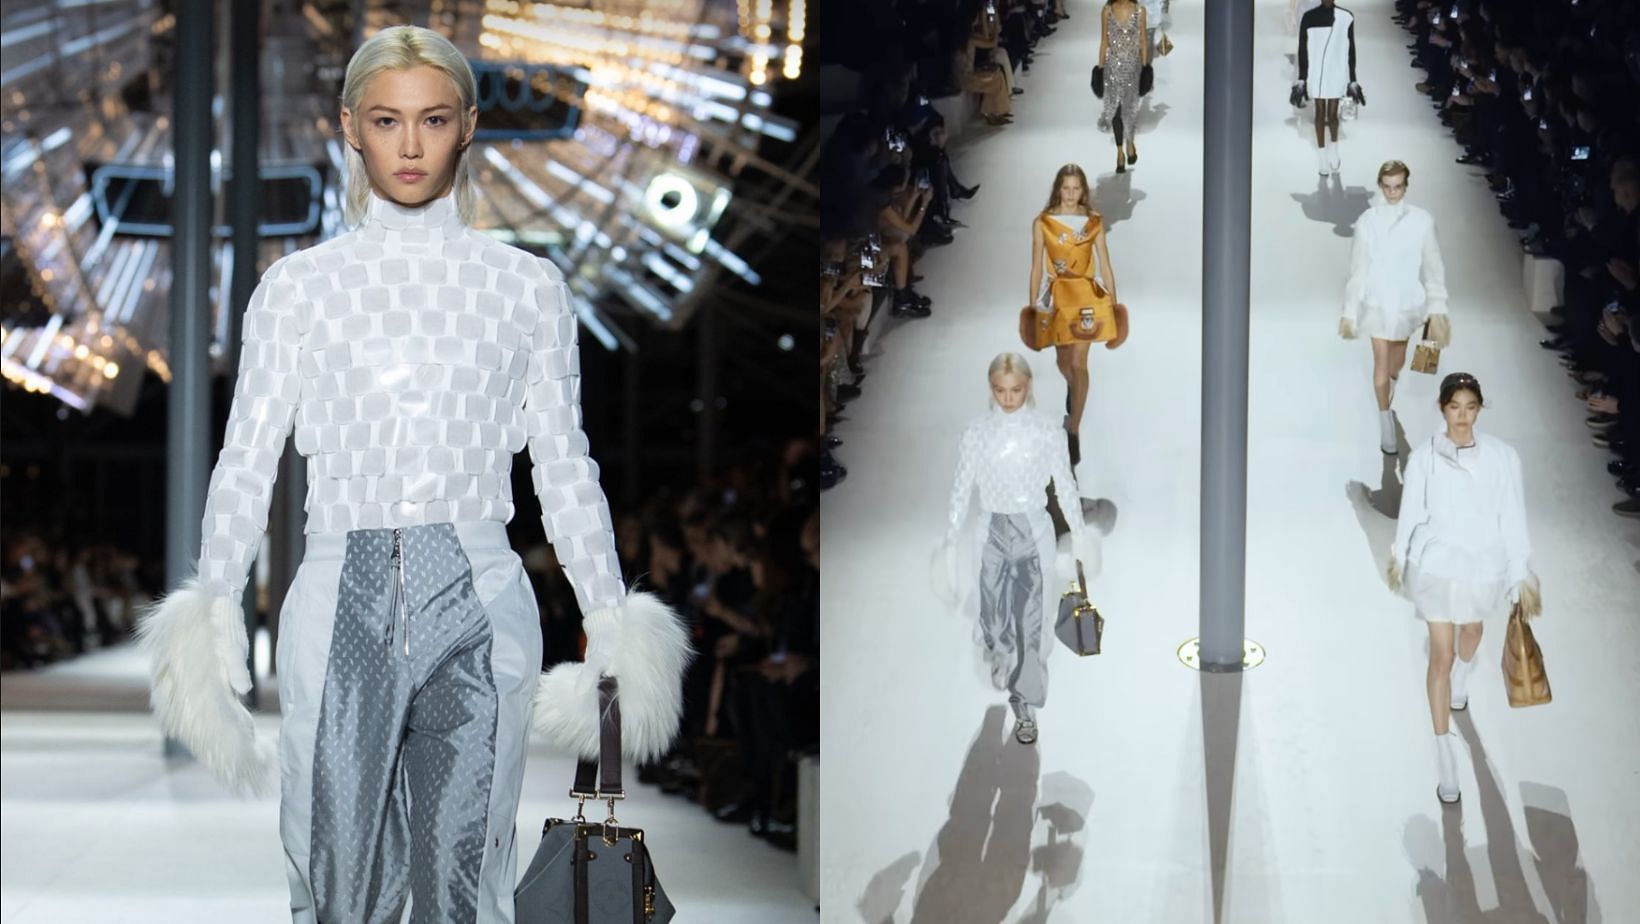 Stray Kids&rsquo; Felix becomes the first 4th Gen idol to debut on the runway for Louis Vuitton at Paris Fashion Week 24/25. (Images via Instagram/@louisvuitton)